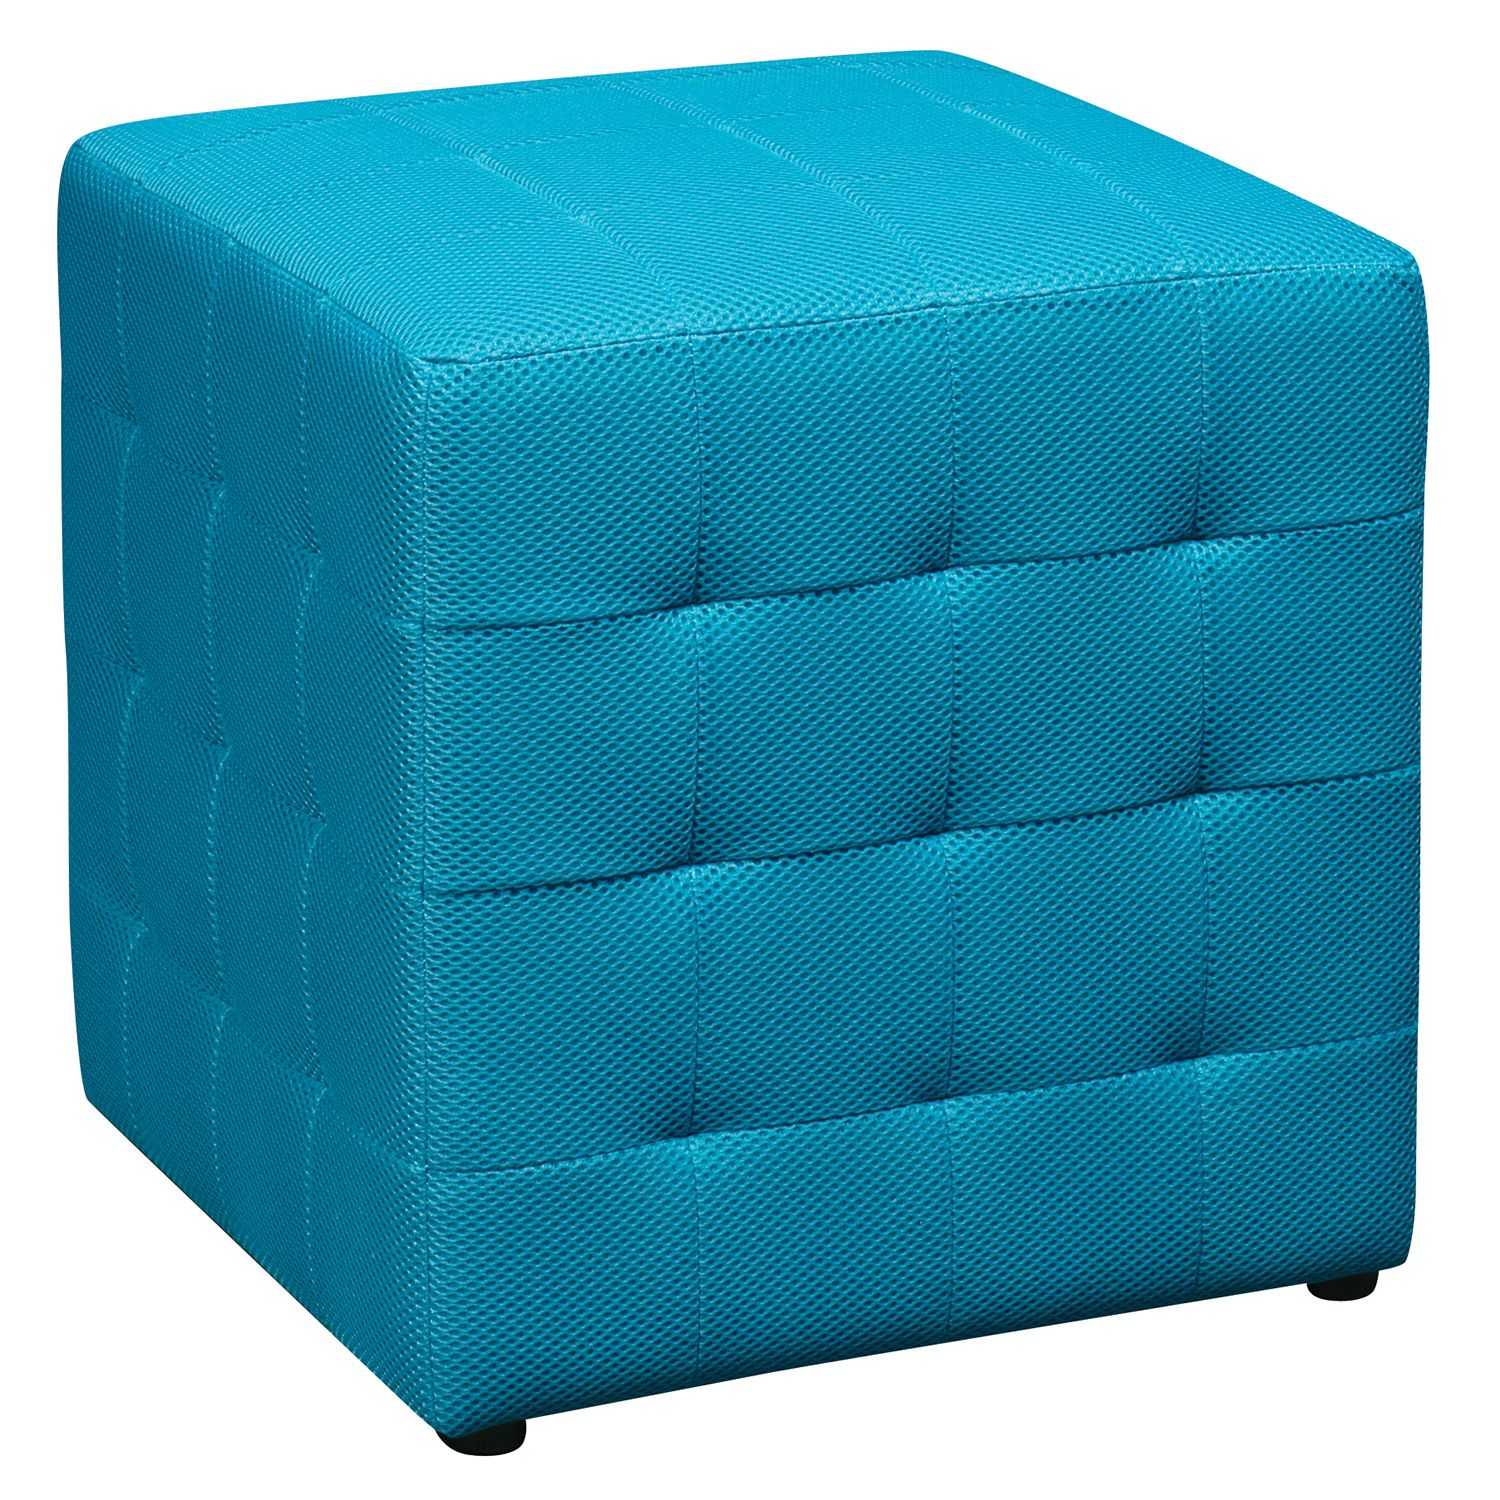 15" Cube Ottoman – Pier1 Pertaining To Solid Cuboid Pouf Ottomans (View 15 of 20)